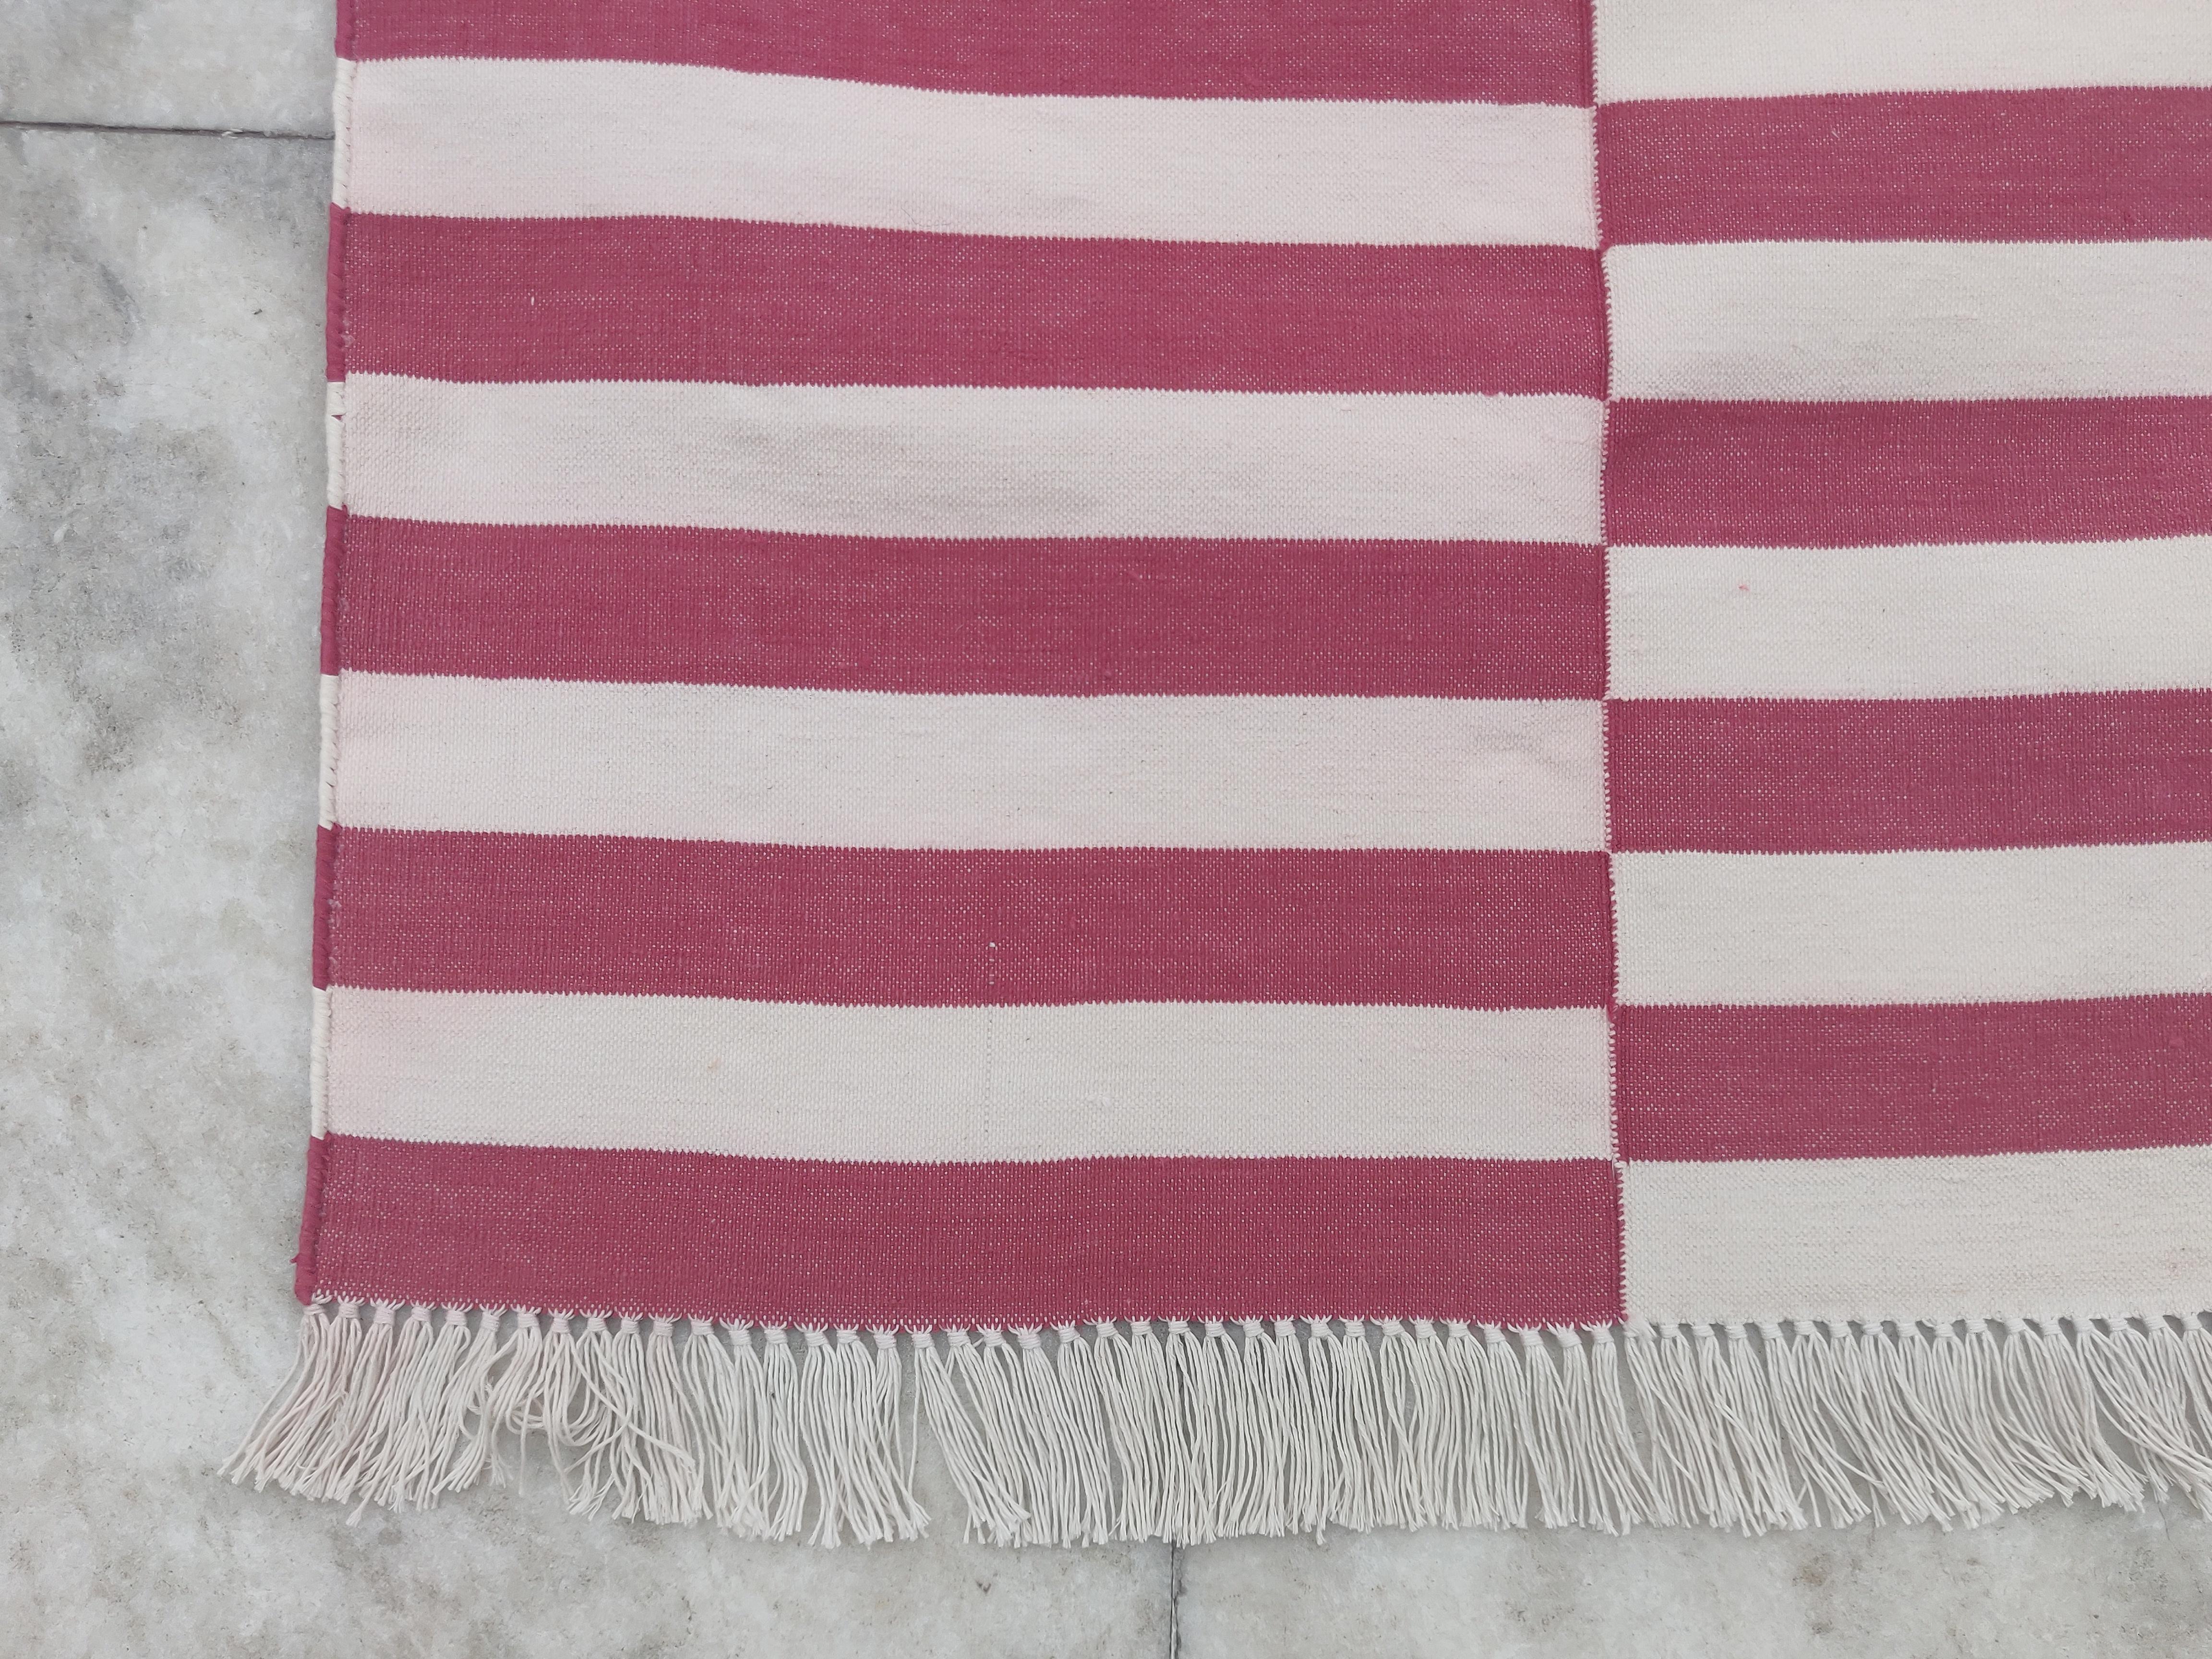 Contemporary Handmade Cotton Area Flat Weave Rug, 2.5x4 Pink And White Striped Indian Dhurrie For Sale